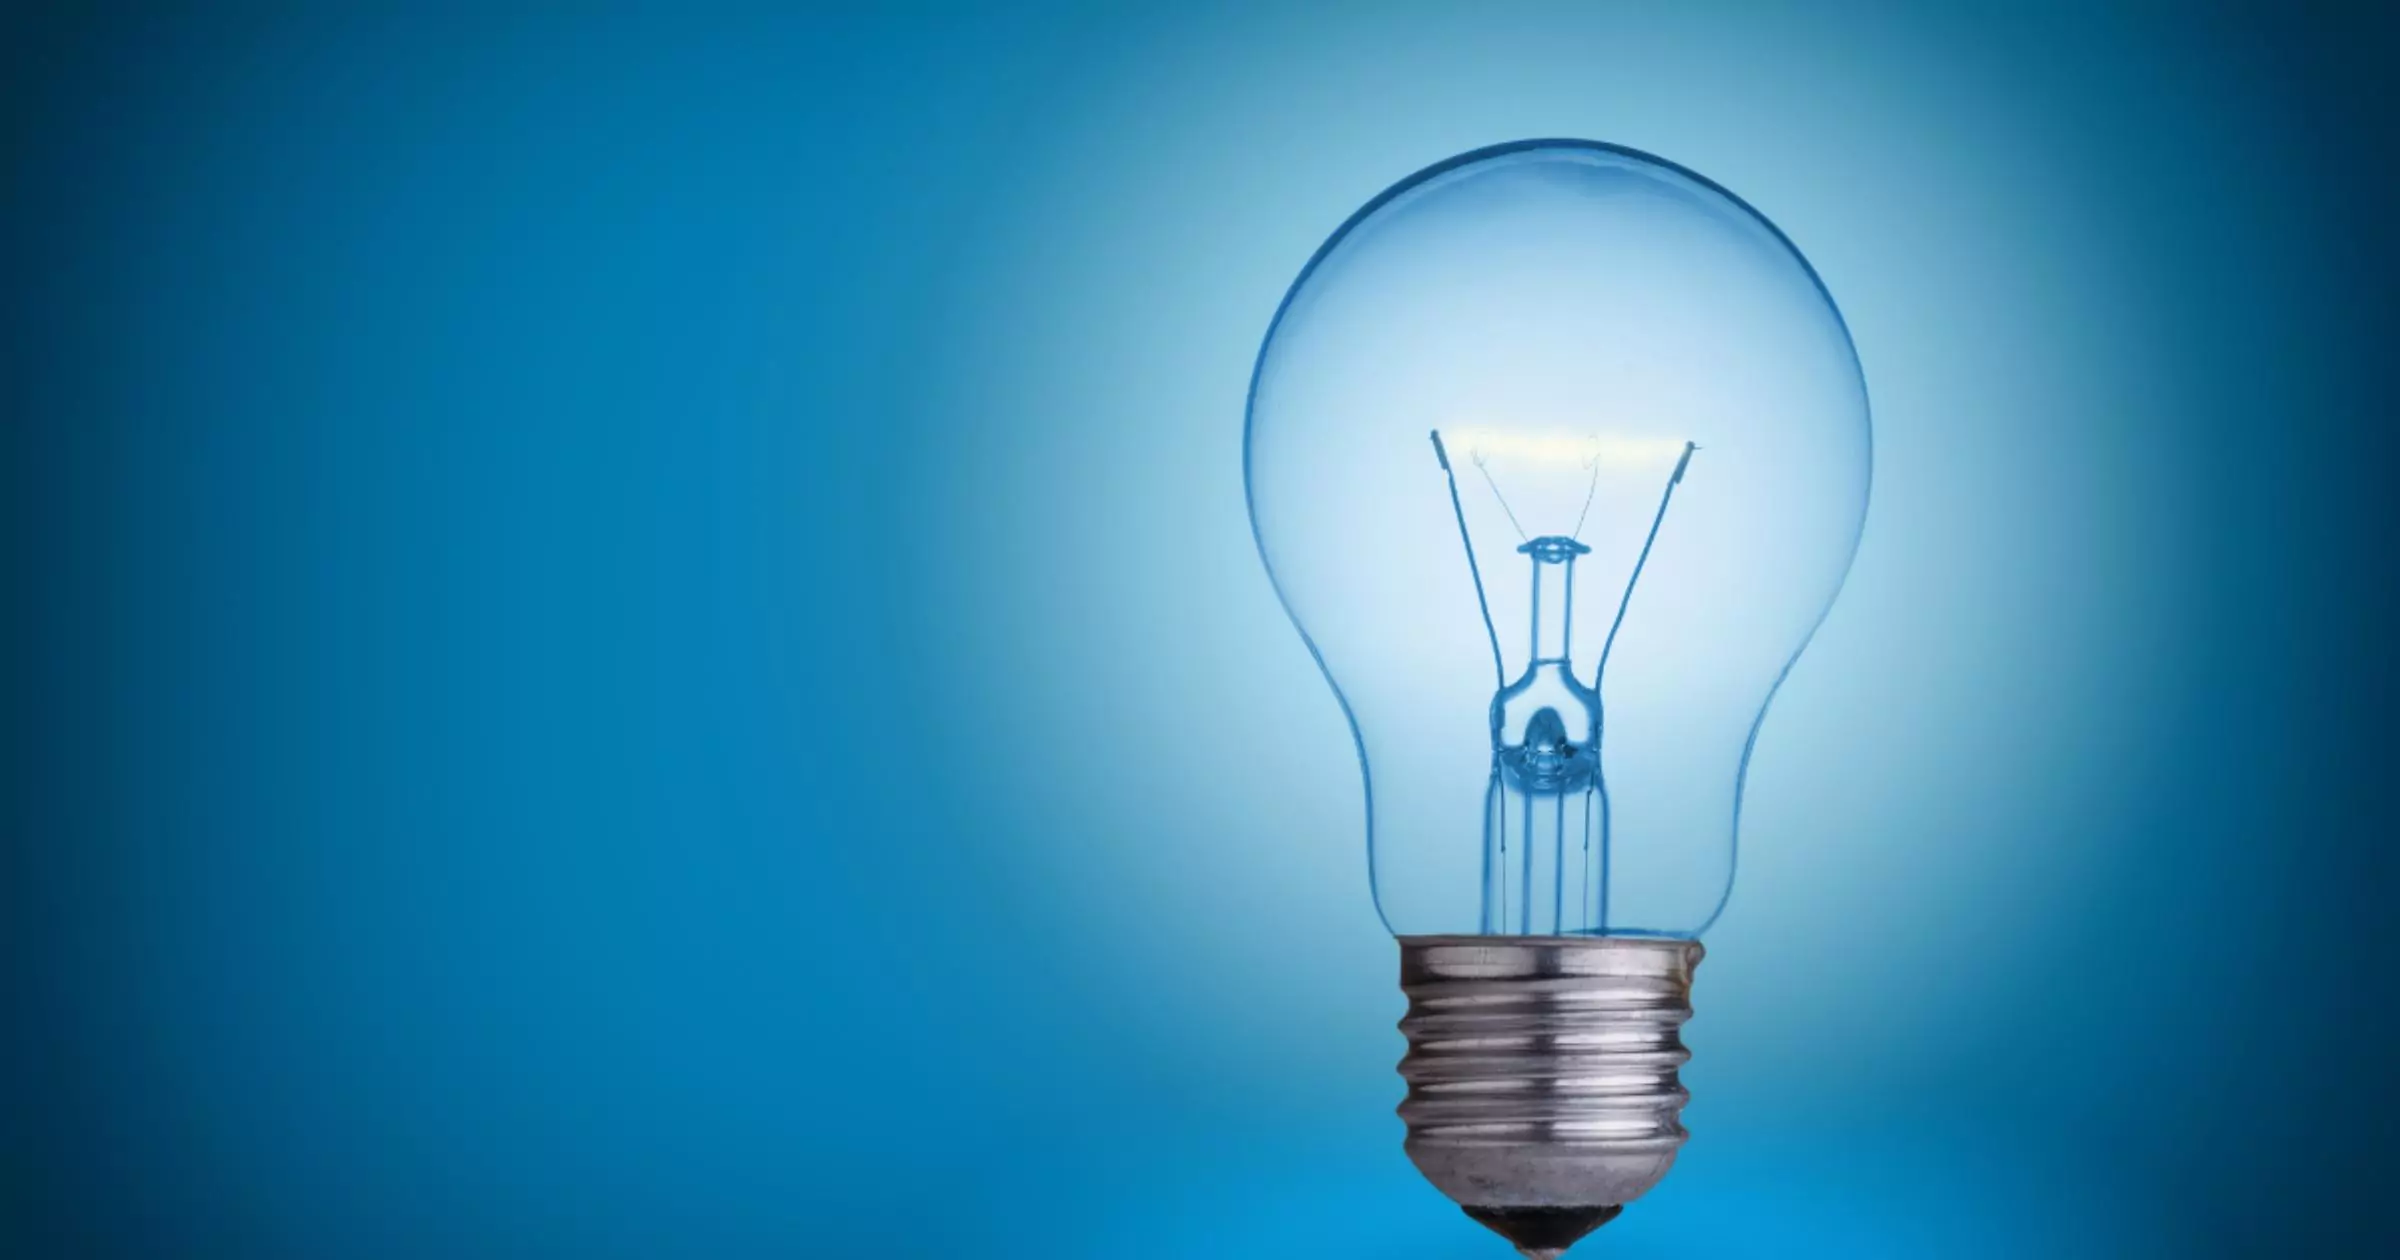 blue background with a light bulb